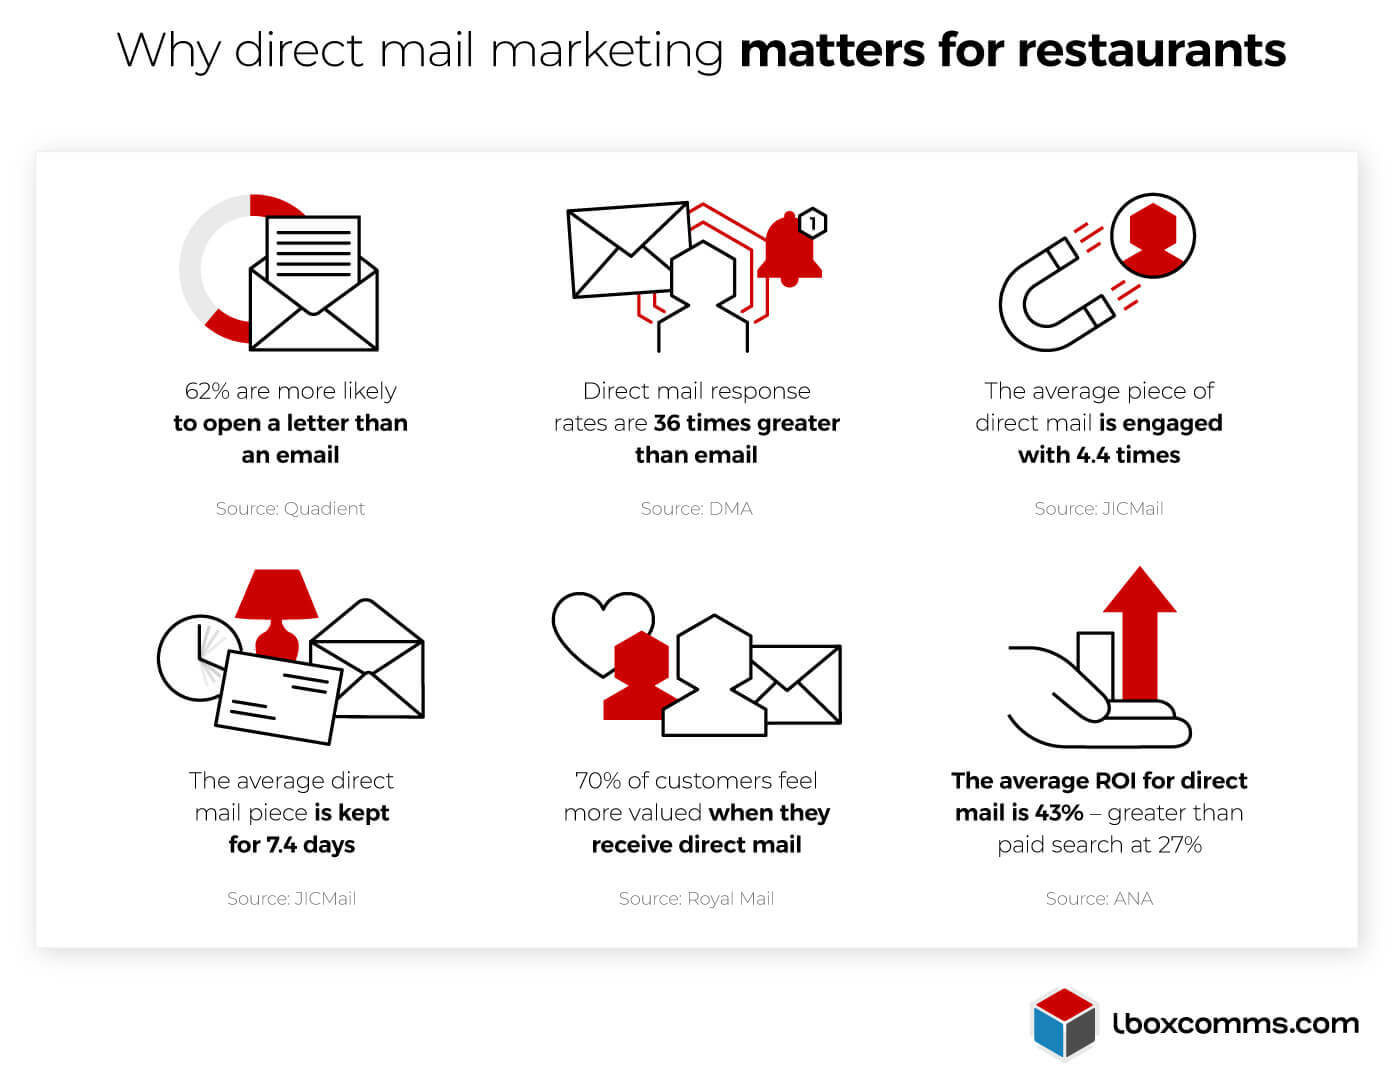 Why direct mail marketing is important for restaurants - Infographic image